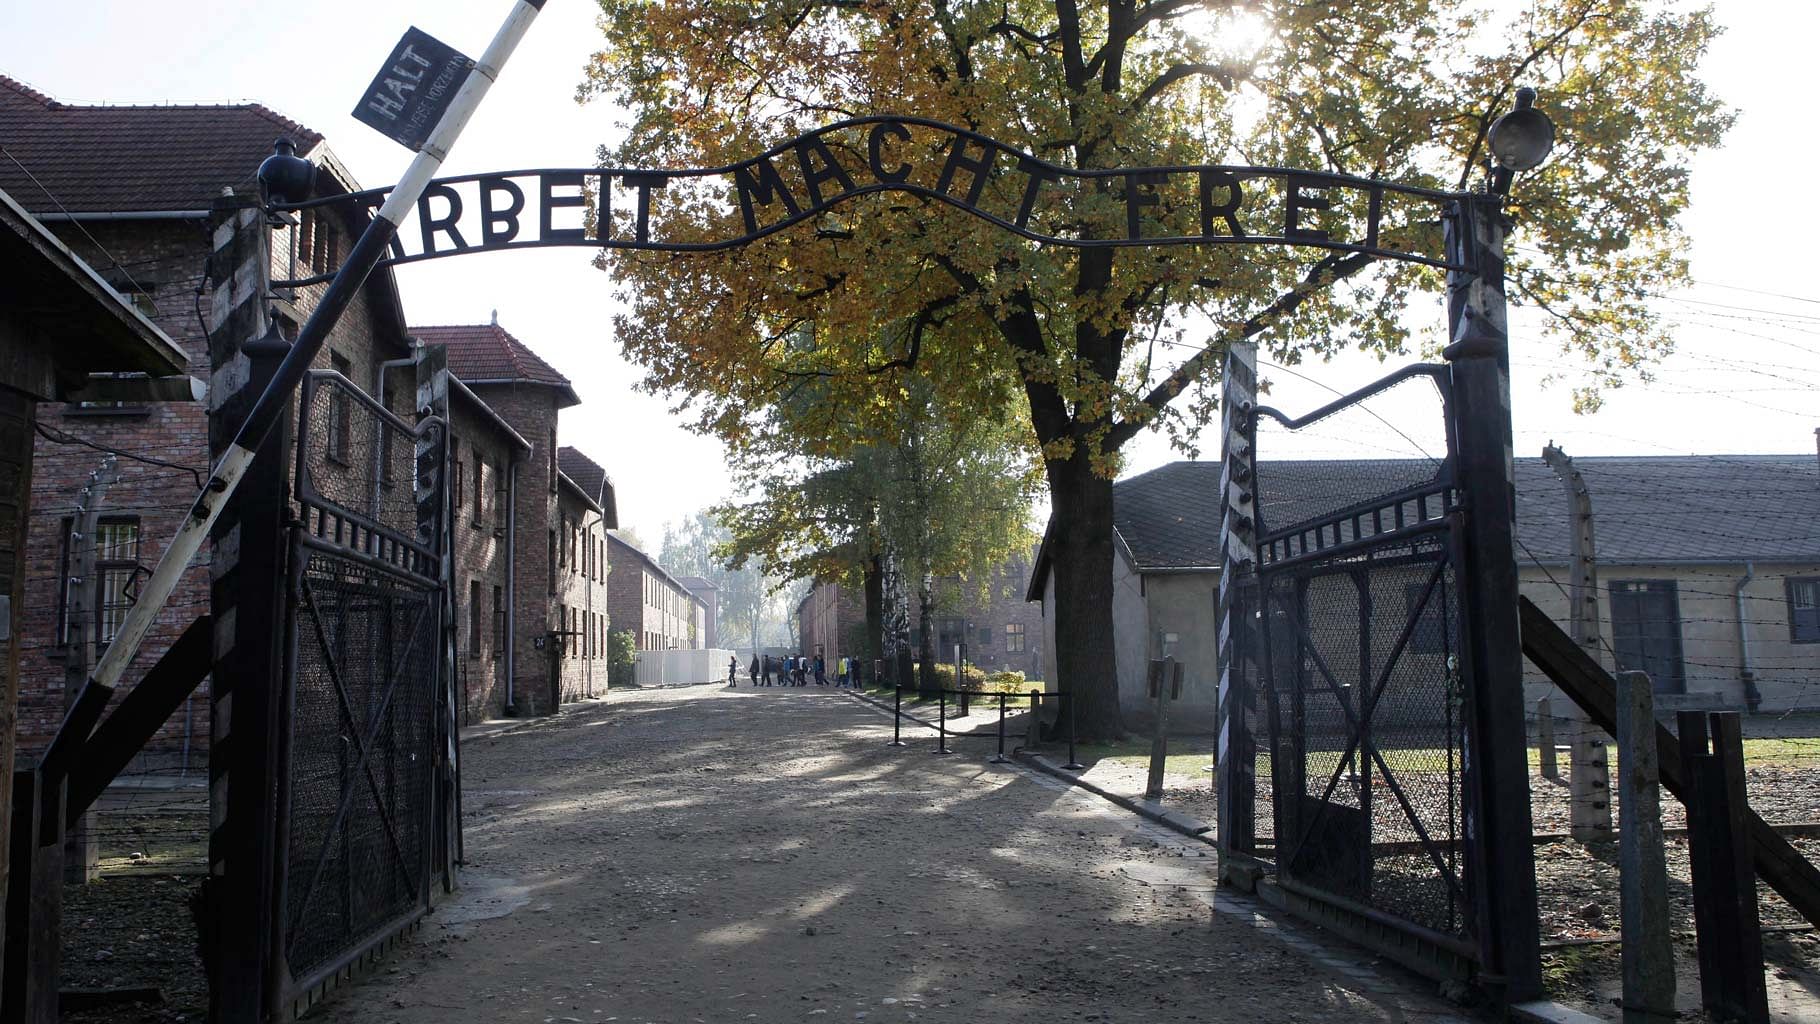 Entrance of the former German Nazi death camp of Auschwitz, with the inscription “Arbeit Macht Frei” (Work Sets You Free). (Photo: AP)